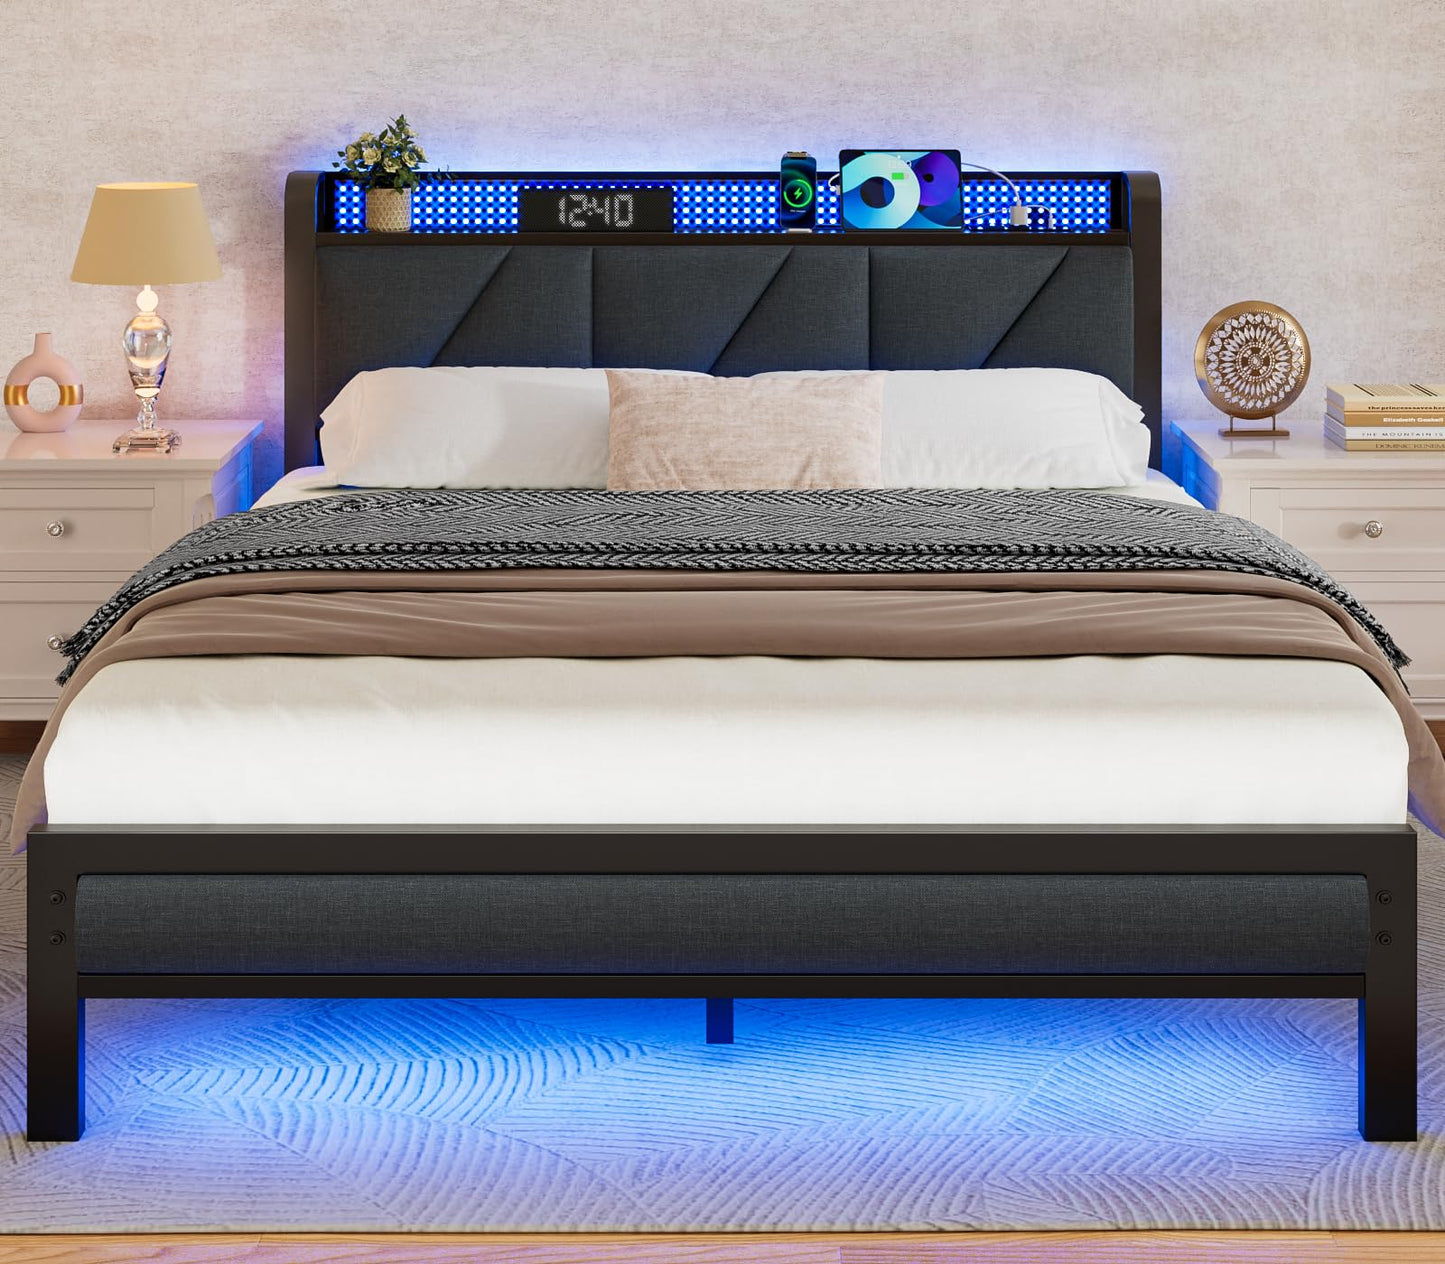 Furnulem Queen Size Bed Frame with Headboard and LED Lights,Upholstered Bedframe with Charging Station and USB Port, Platform Metal Bed Frame,No Box Spring Needed, Noise Free